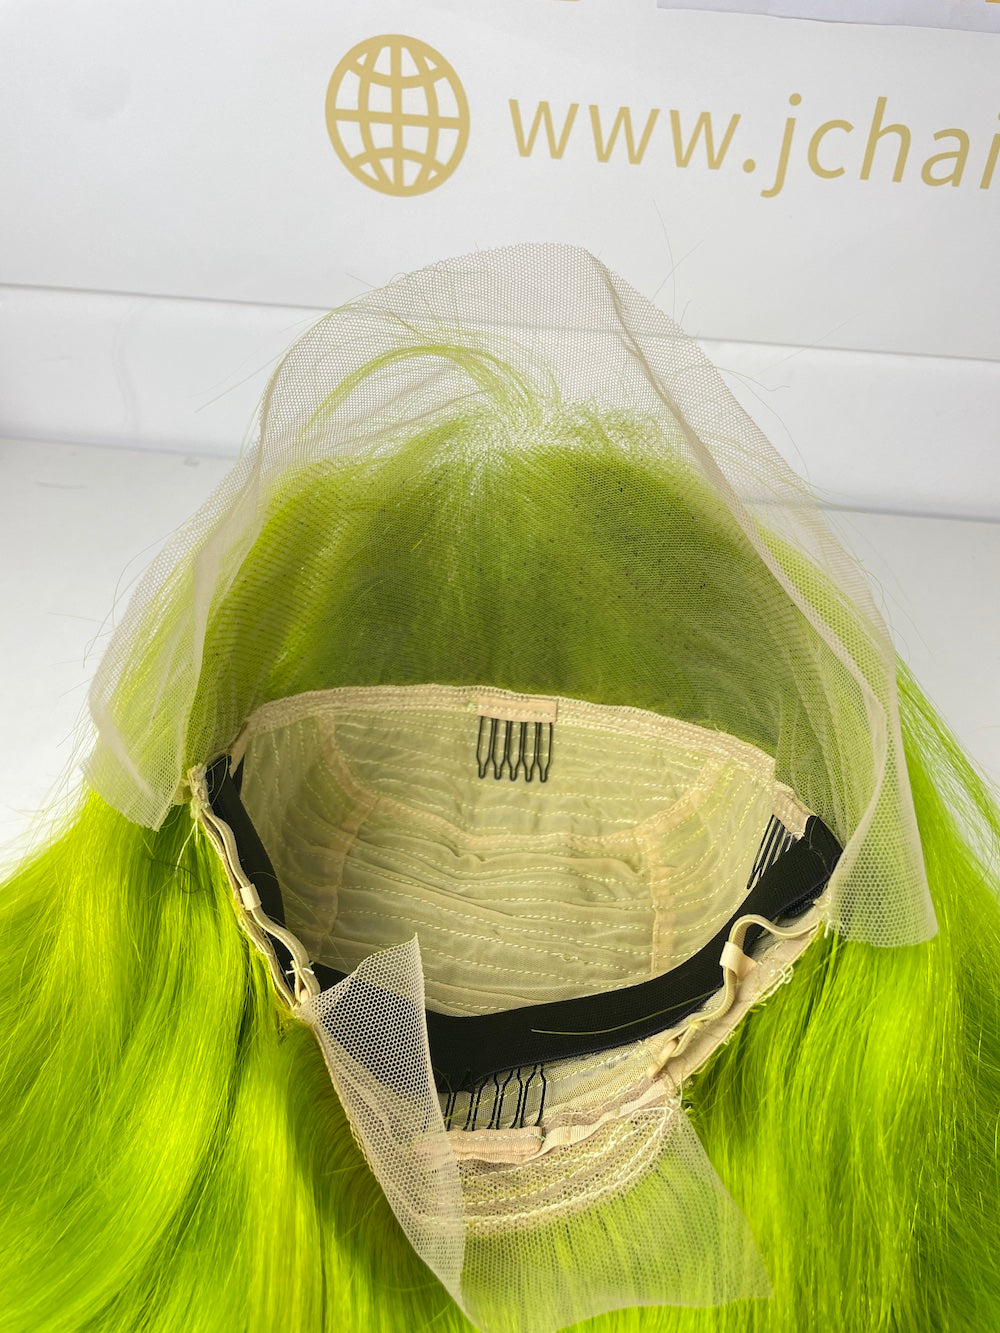 13*4 Full Frontal Transparent Lace Bob Colored Wig Straight 180% - Green